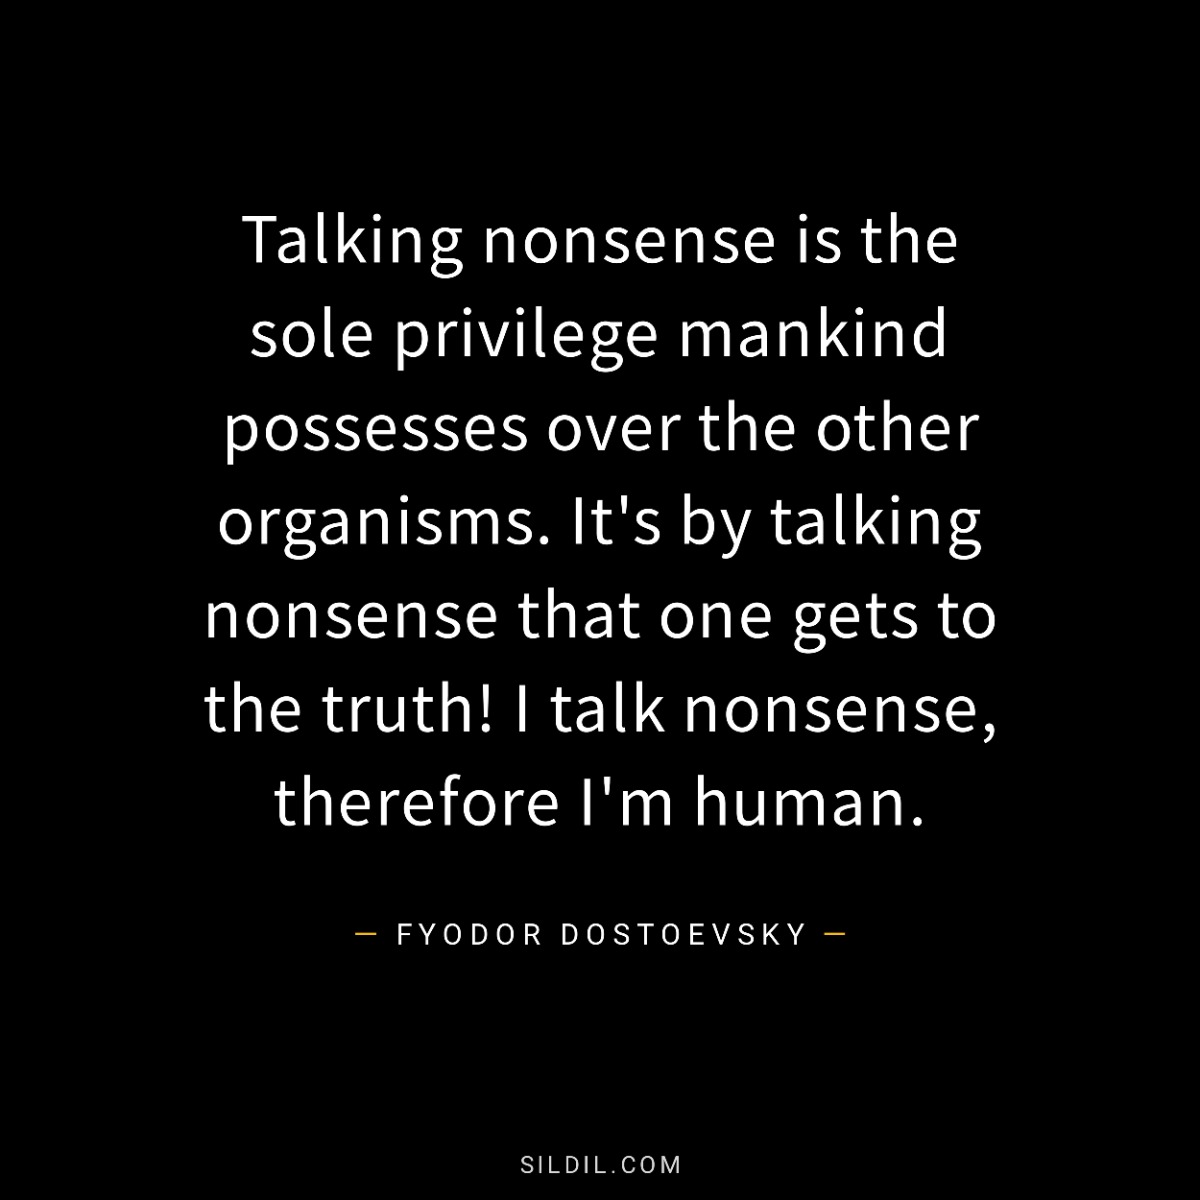 Talking nonsense is the sole privilege mankind possesses over the other organisms. It's by talking nonsense that one gets to the truth! I talk nonsense, therefore I'm human.